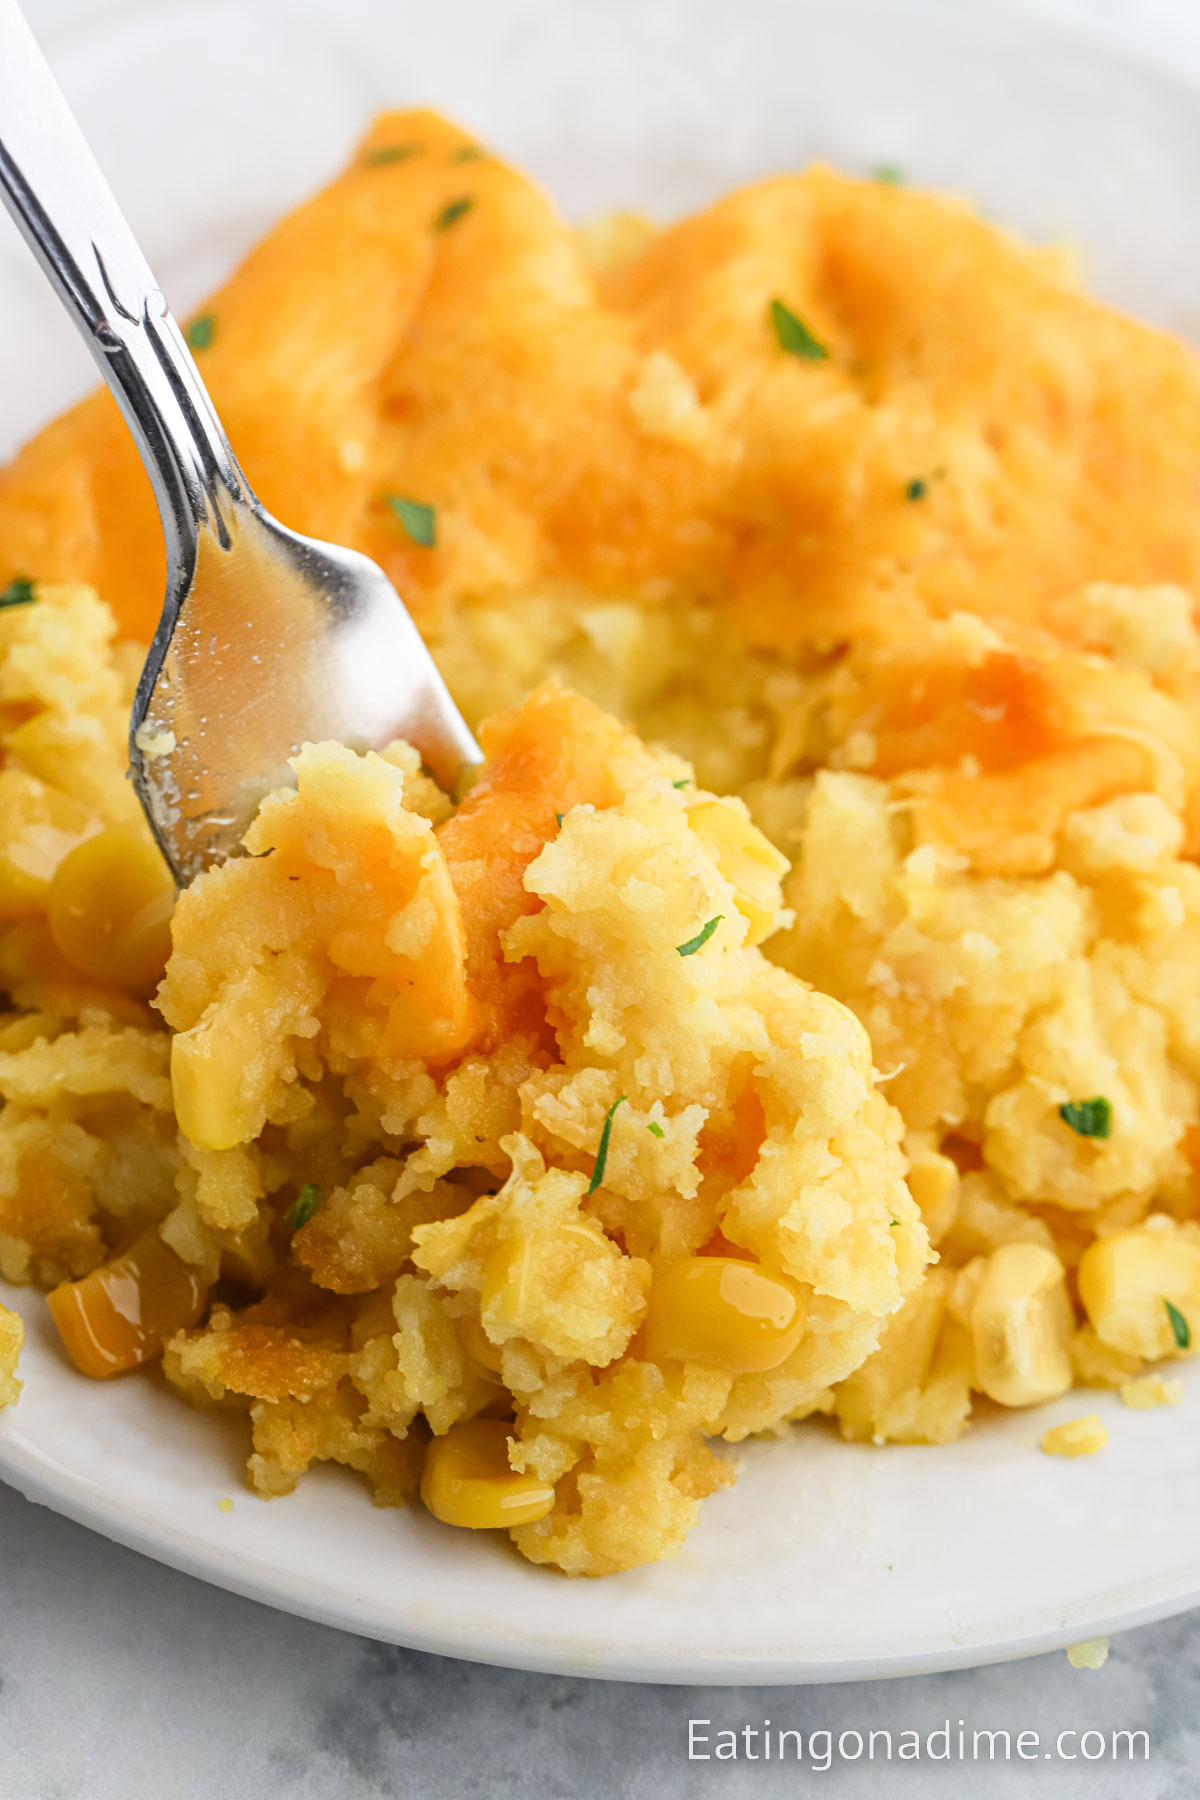 Corn casserole on a plate with fork